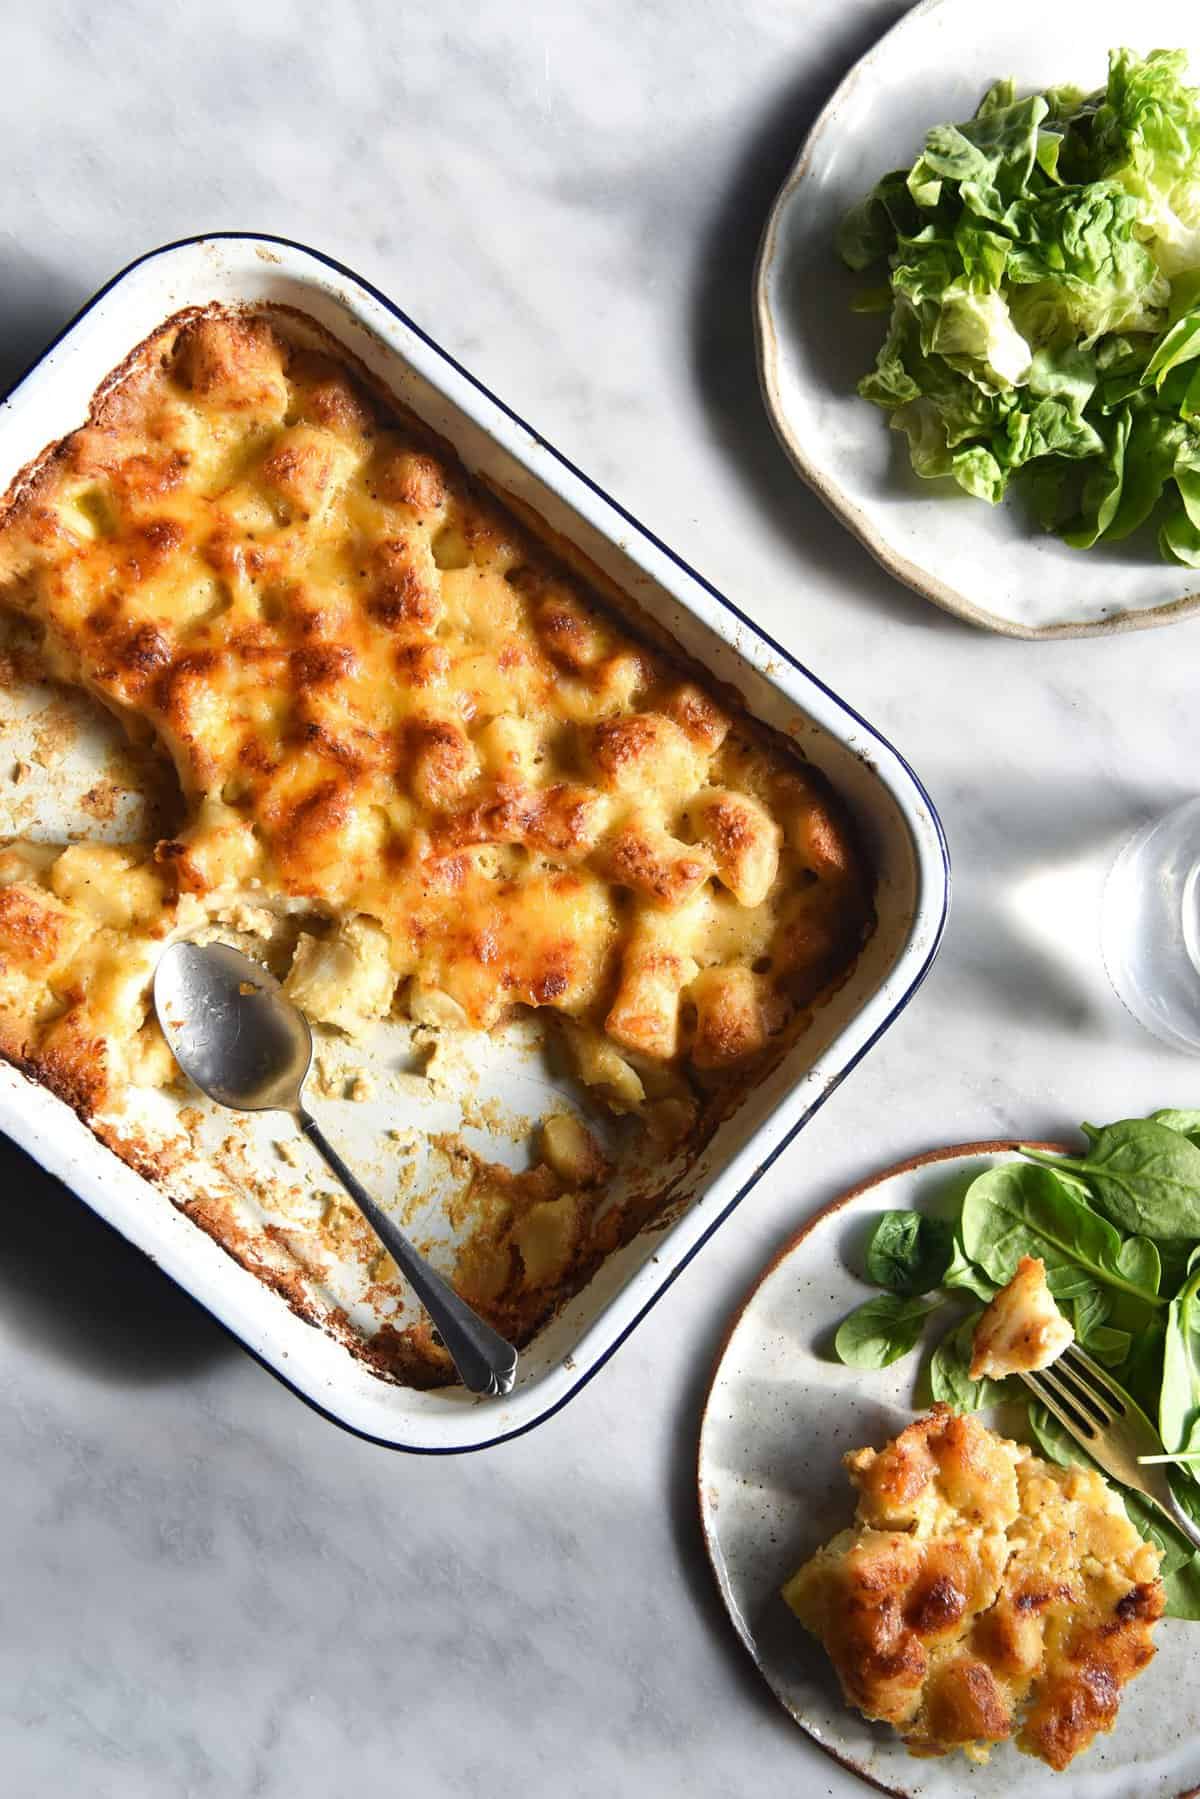 Gluten free gnocchi in a lactose free bechamel in a white oven dish. The dish sits on a white marble table and is surrounded by plates with gnocchi bake and salad on them.